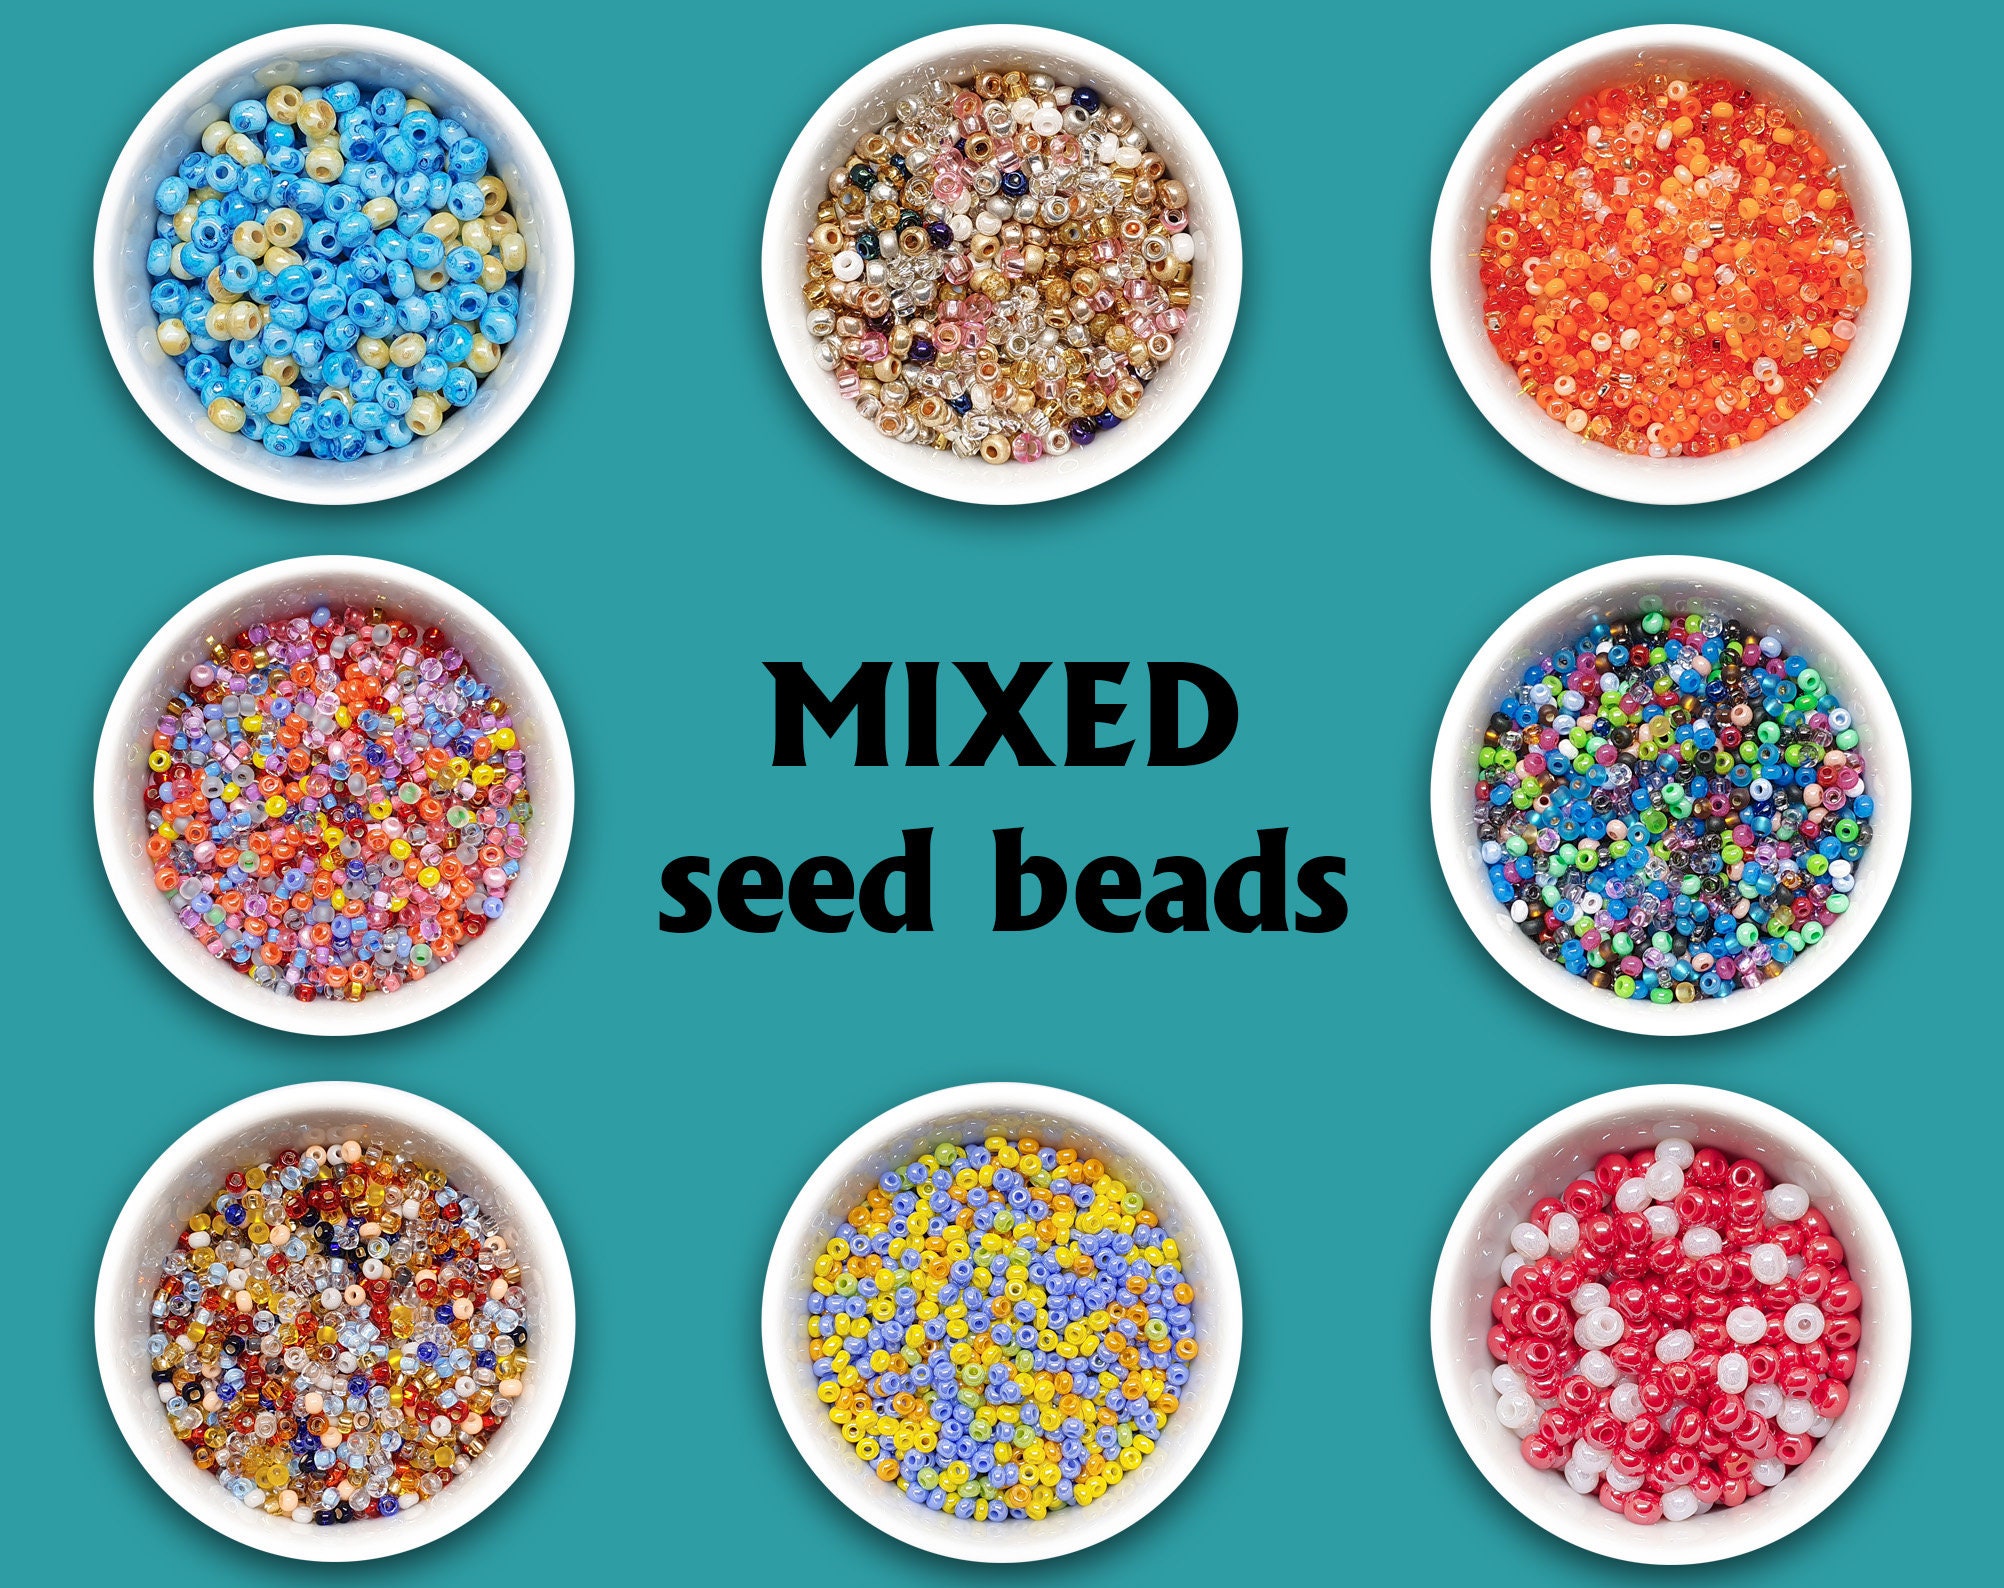 445G Multicolor Glass Seed Bead Mix, Soup, Bead Confetti, 2mm-4mm